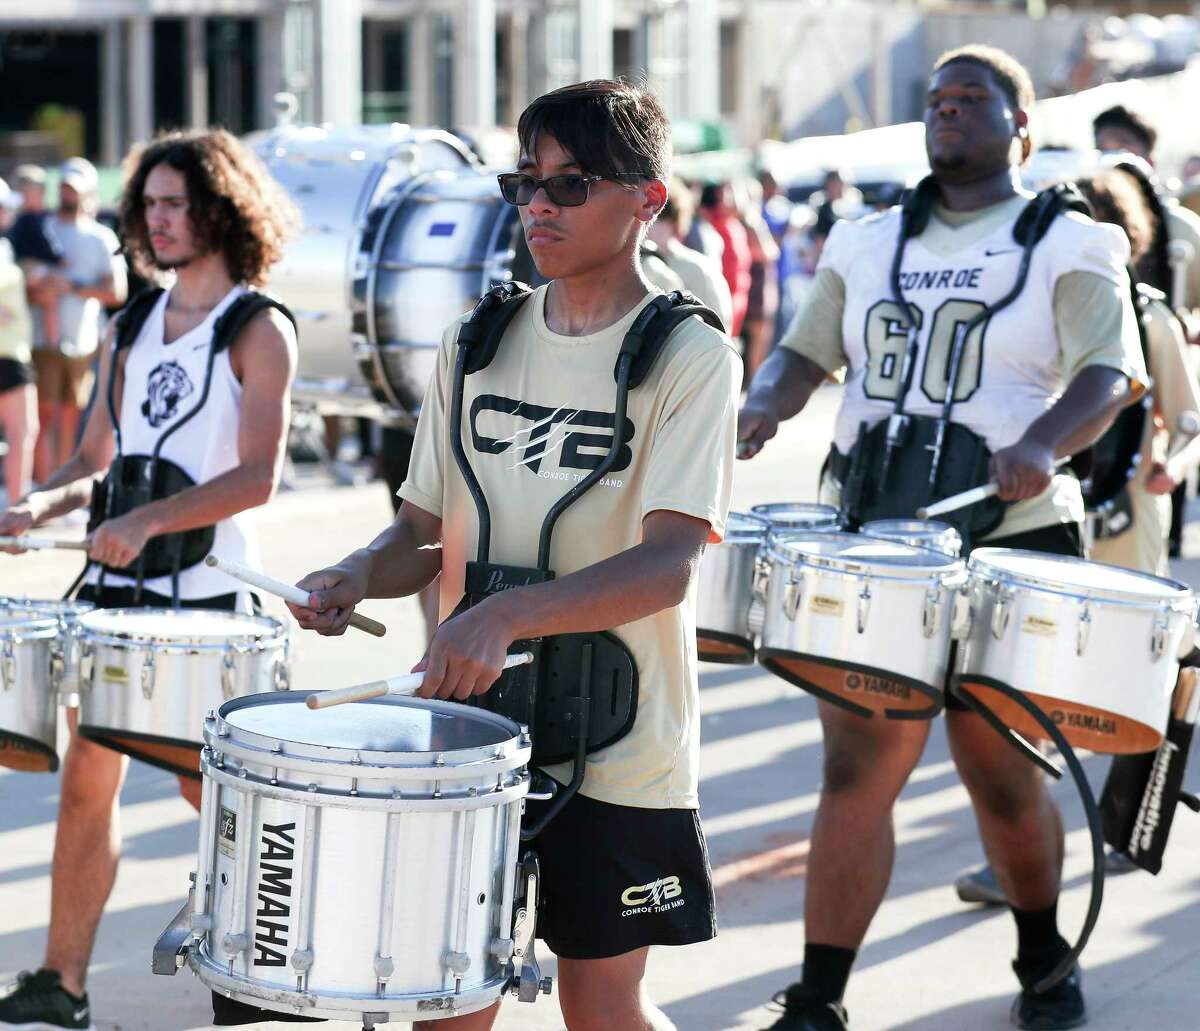 Members of the Conroe Tiger Band drum line perform during Conroe High School’s homecoming parade, Wednesday, Sept. 14, 2022, in Conroe.